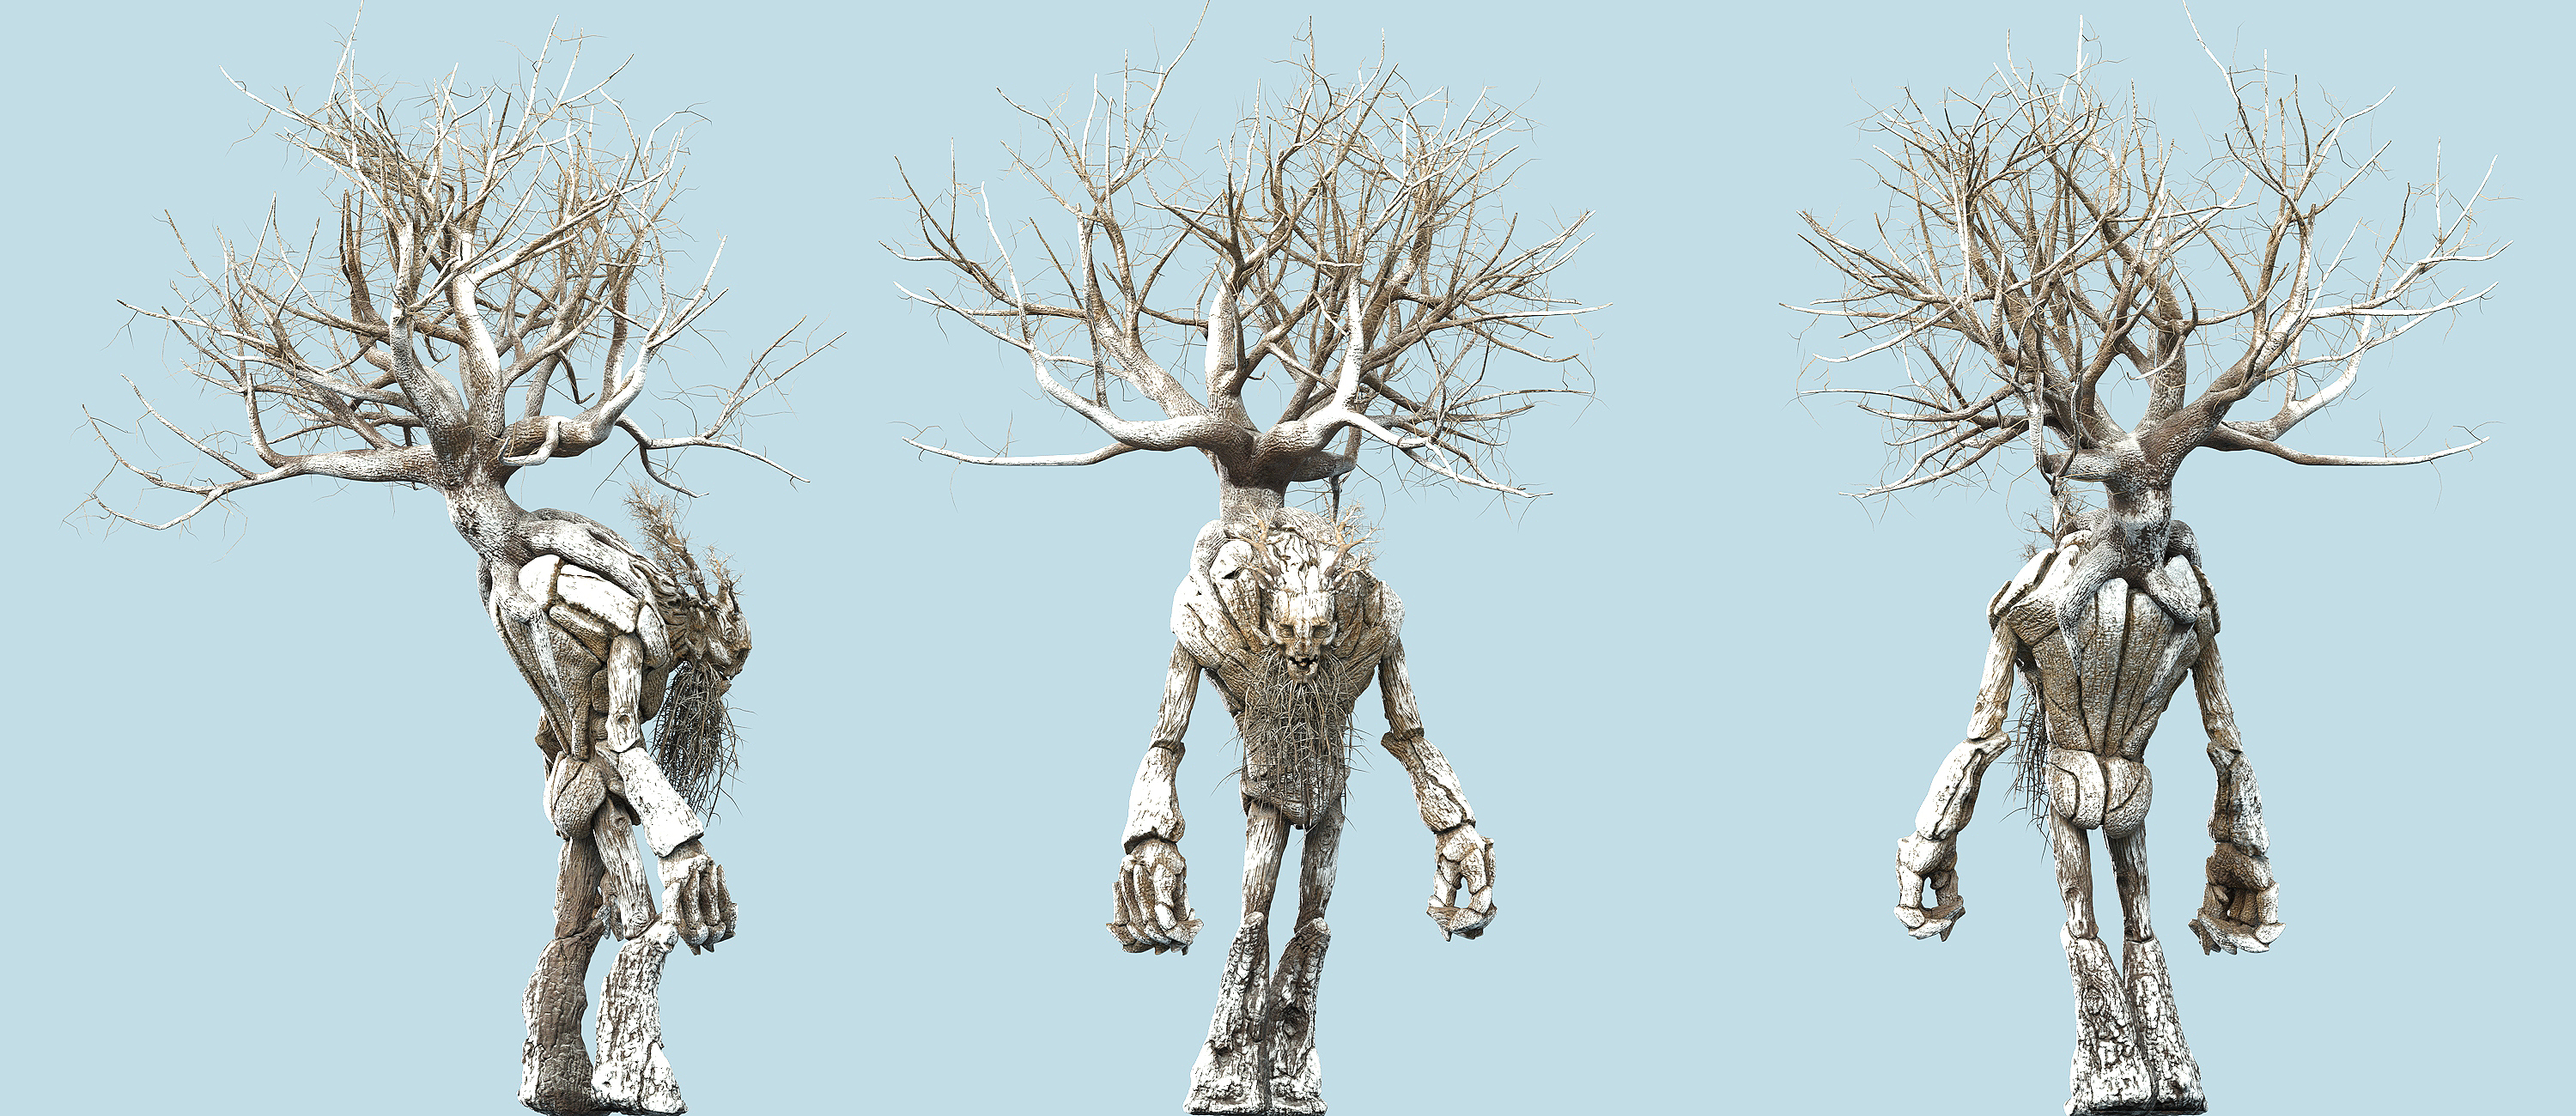 Tree Giant HD for Genesis 8.1 Males Expansion by: JoeQuick, 3D Models by Daz 3D